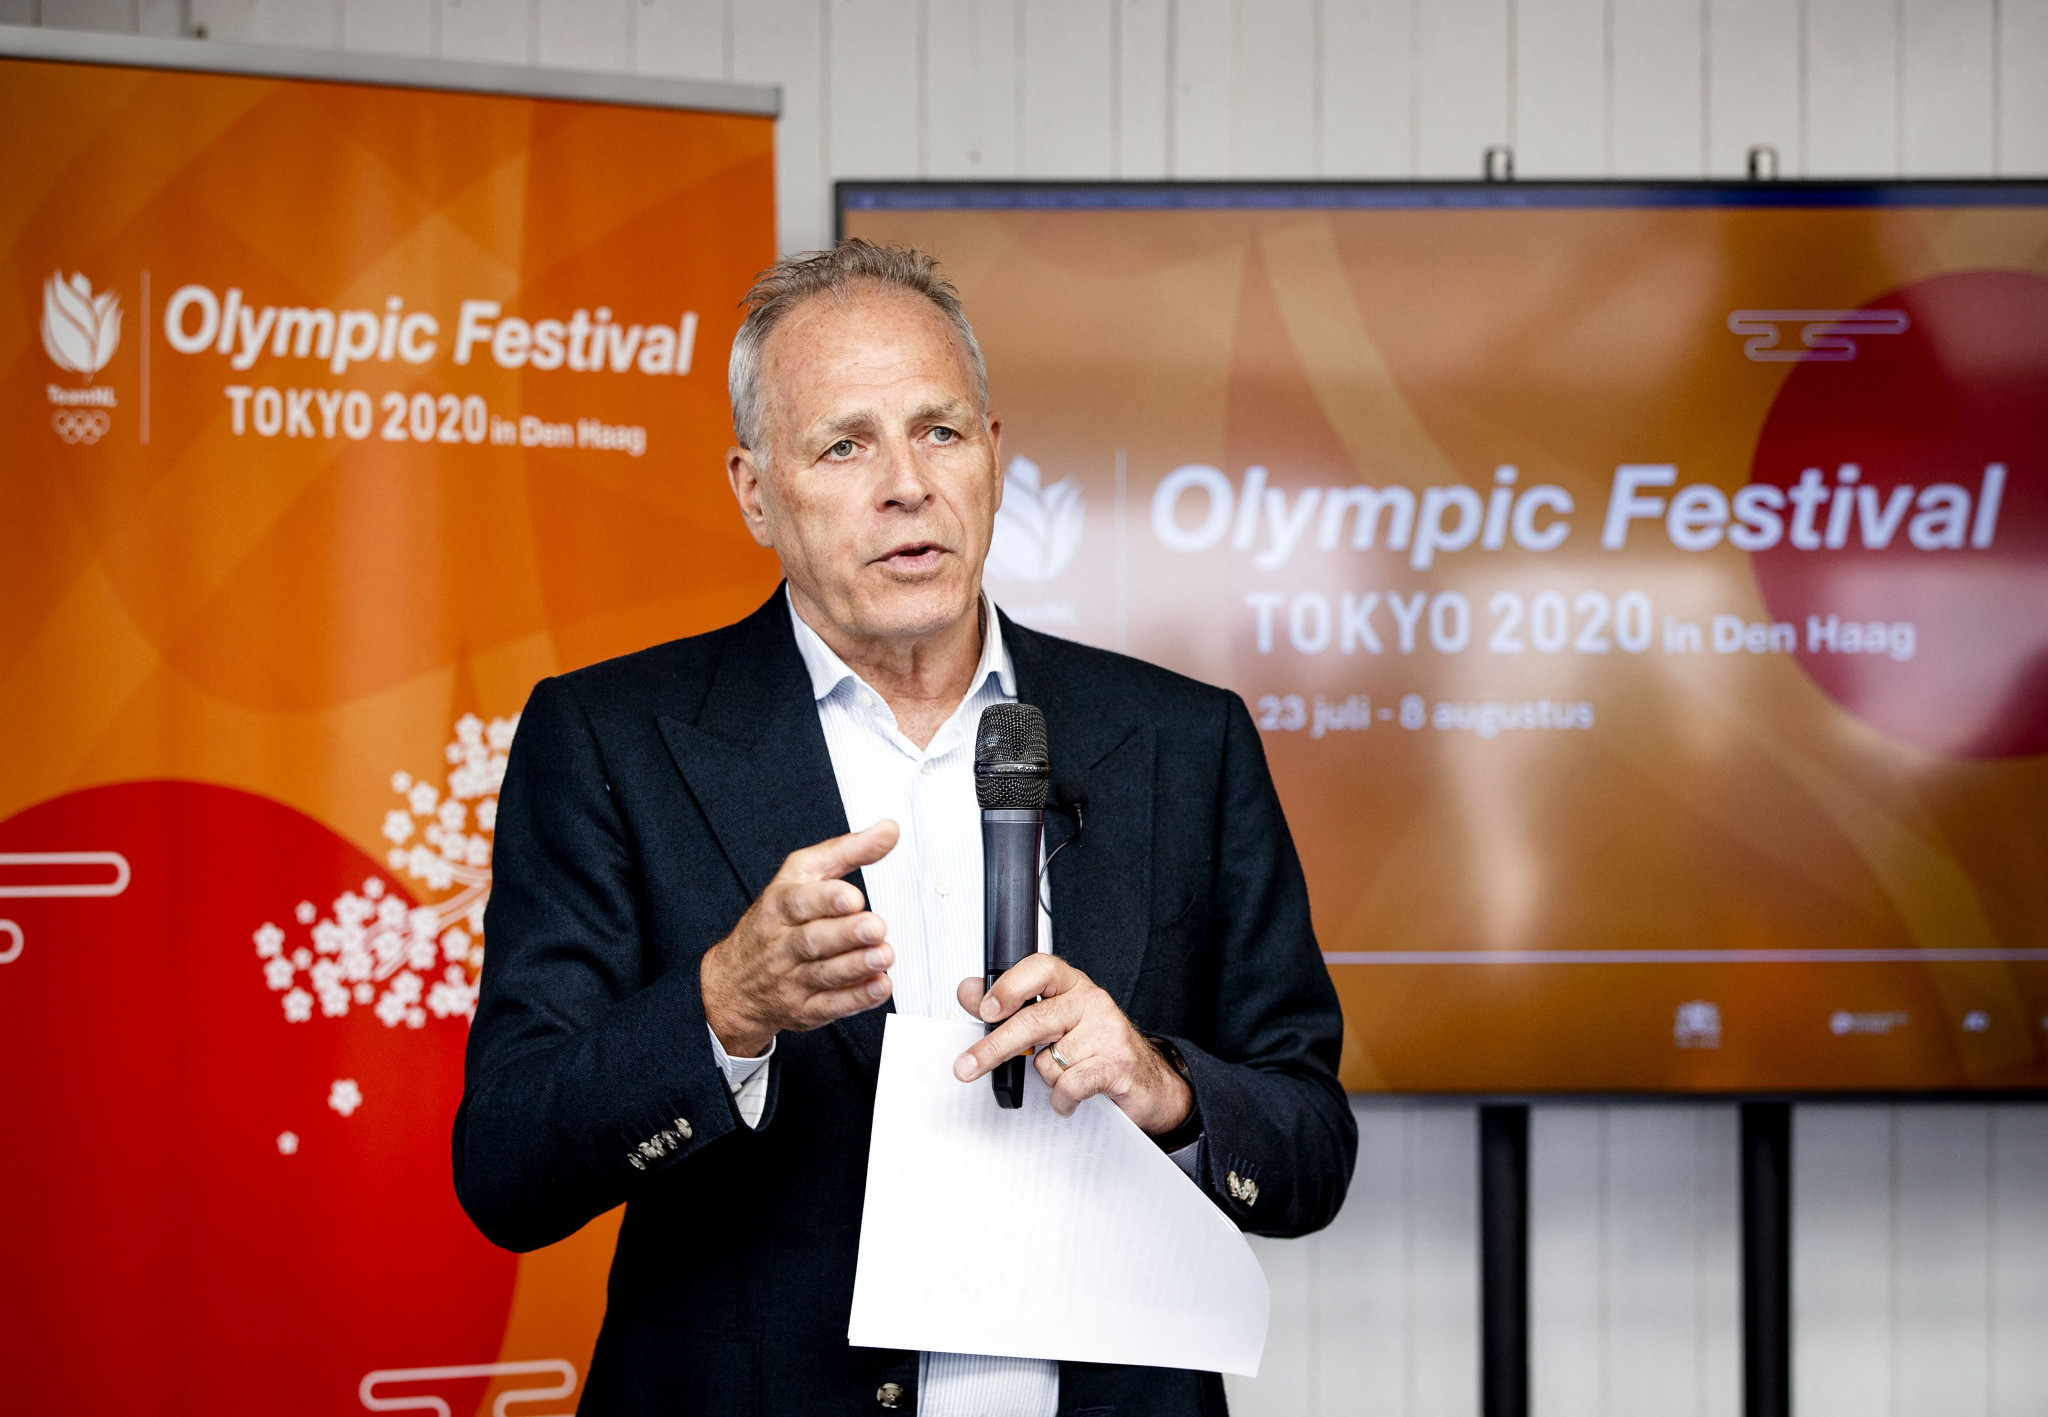 Gerard Dielessen hopes the updated governance code can help the Dutch Olympic Committee*Dutch Sports Federation become more transparent and progressive ©Getty Images